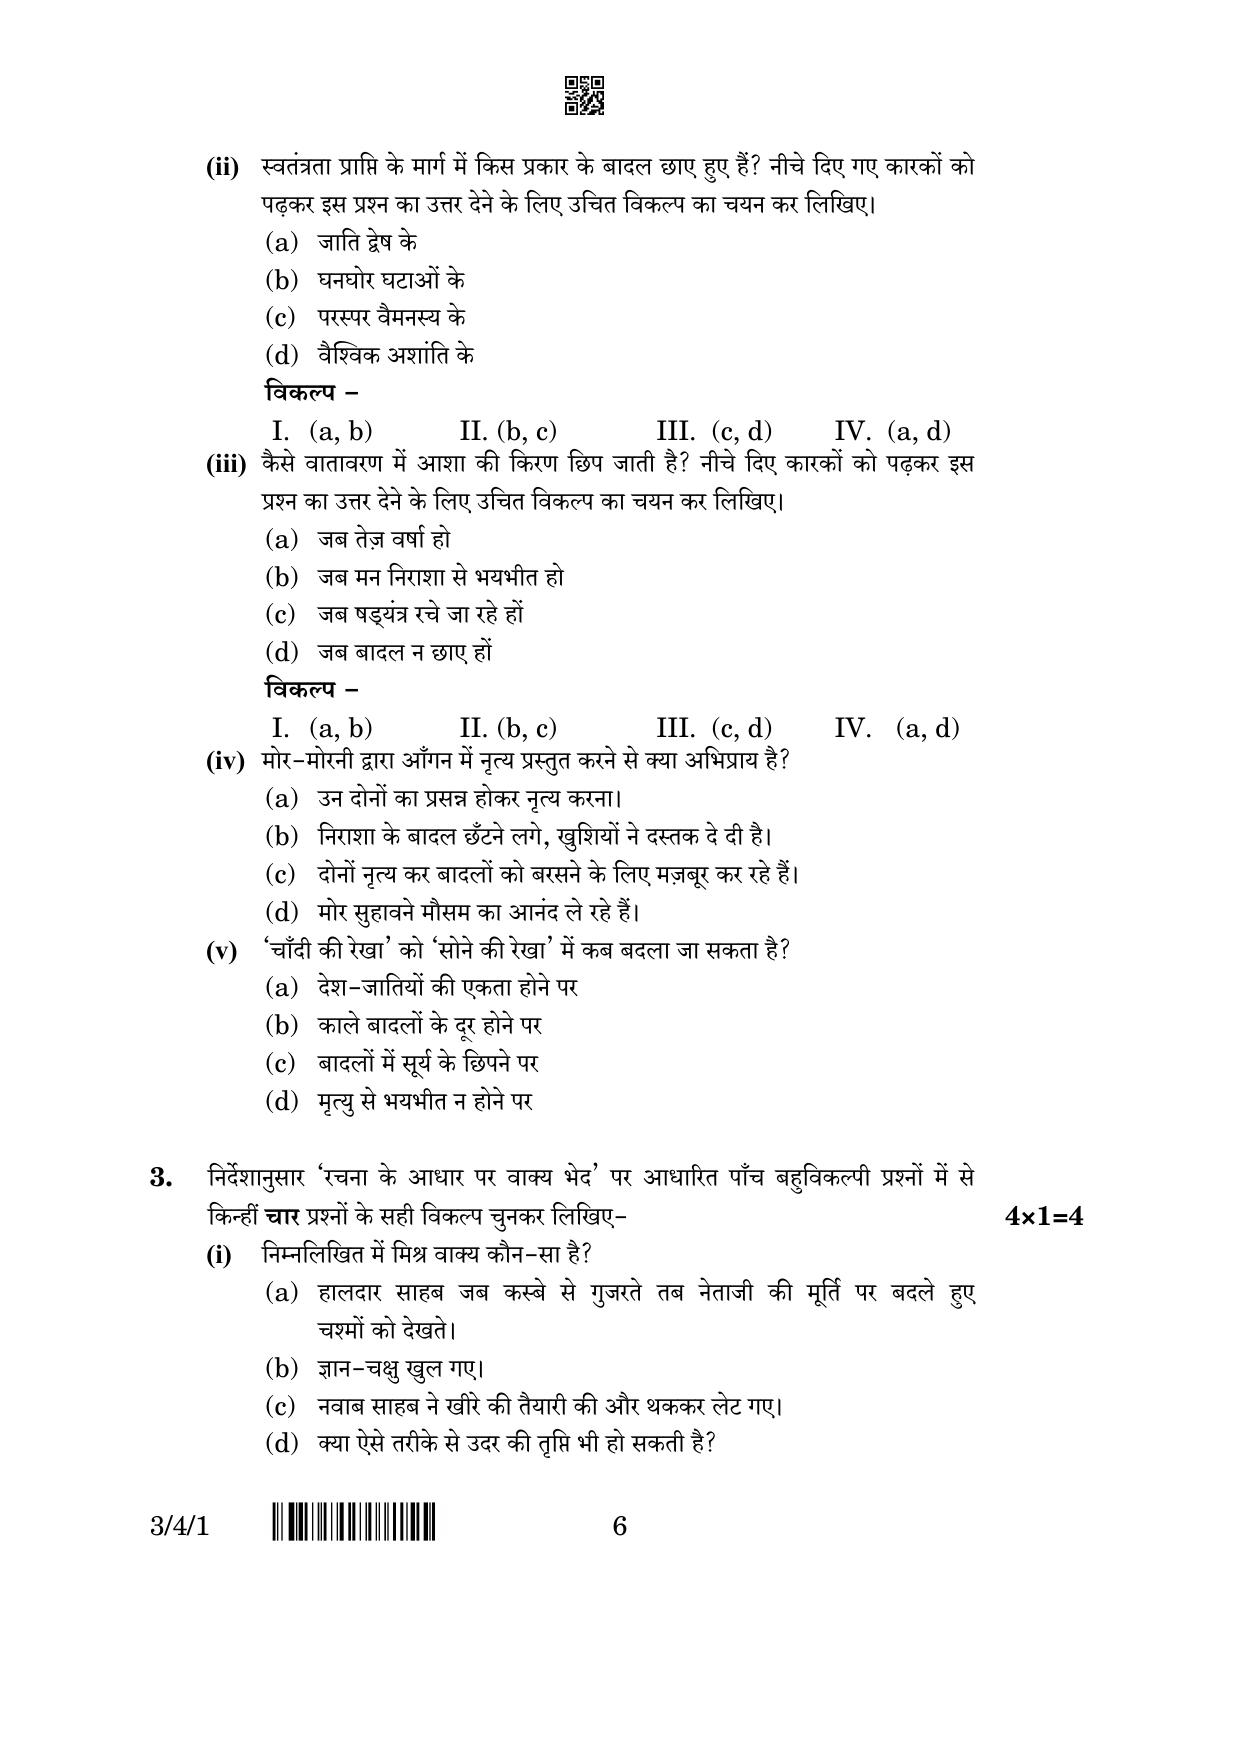 CBSE Class 10 3-4-1 Hindi A 2023 Question Paper - Page 6